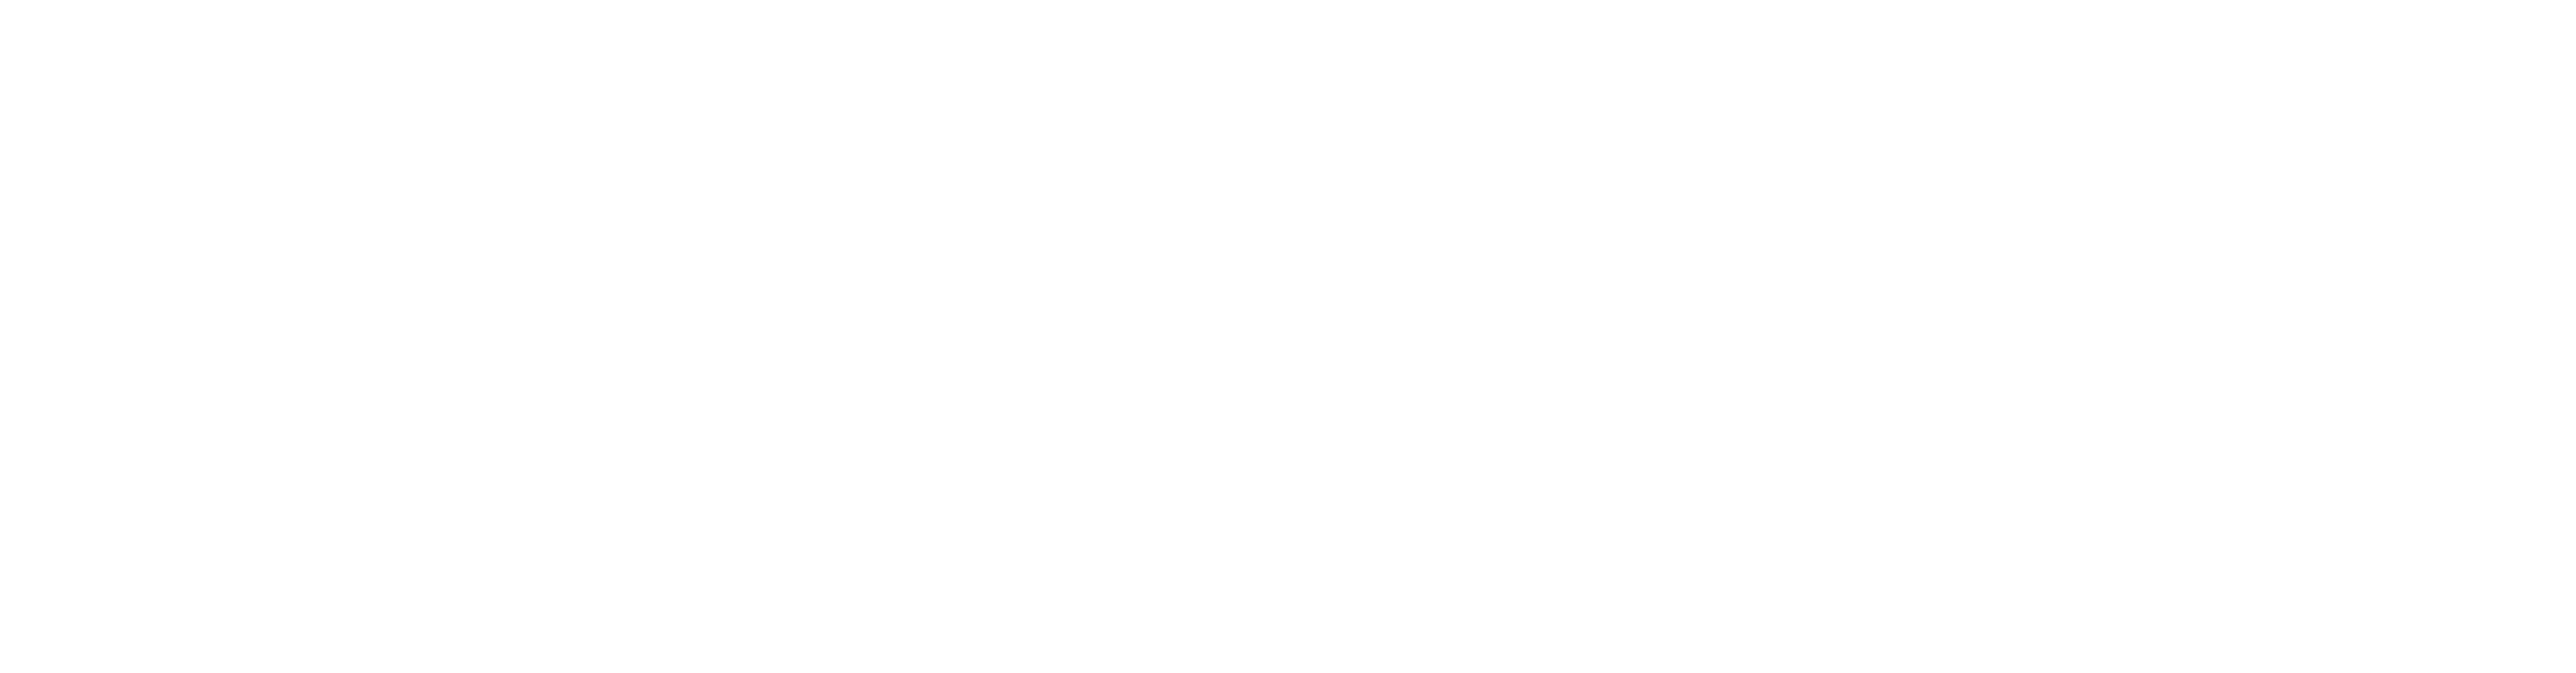 Dotmap-experience